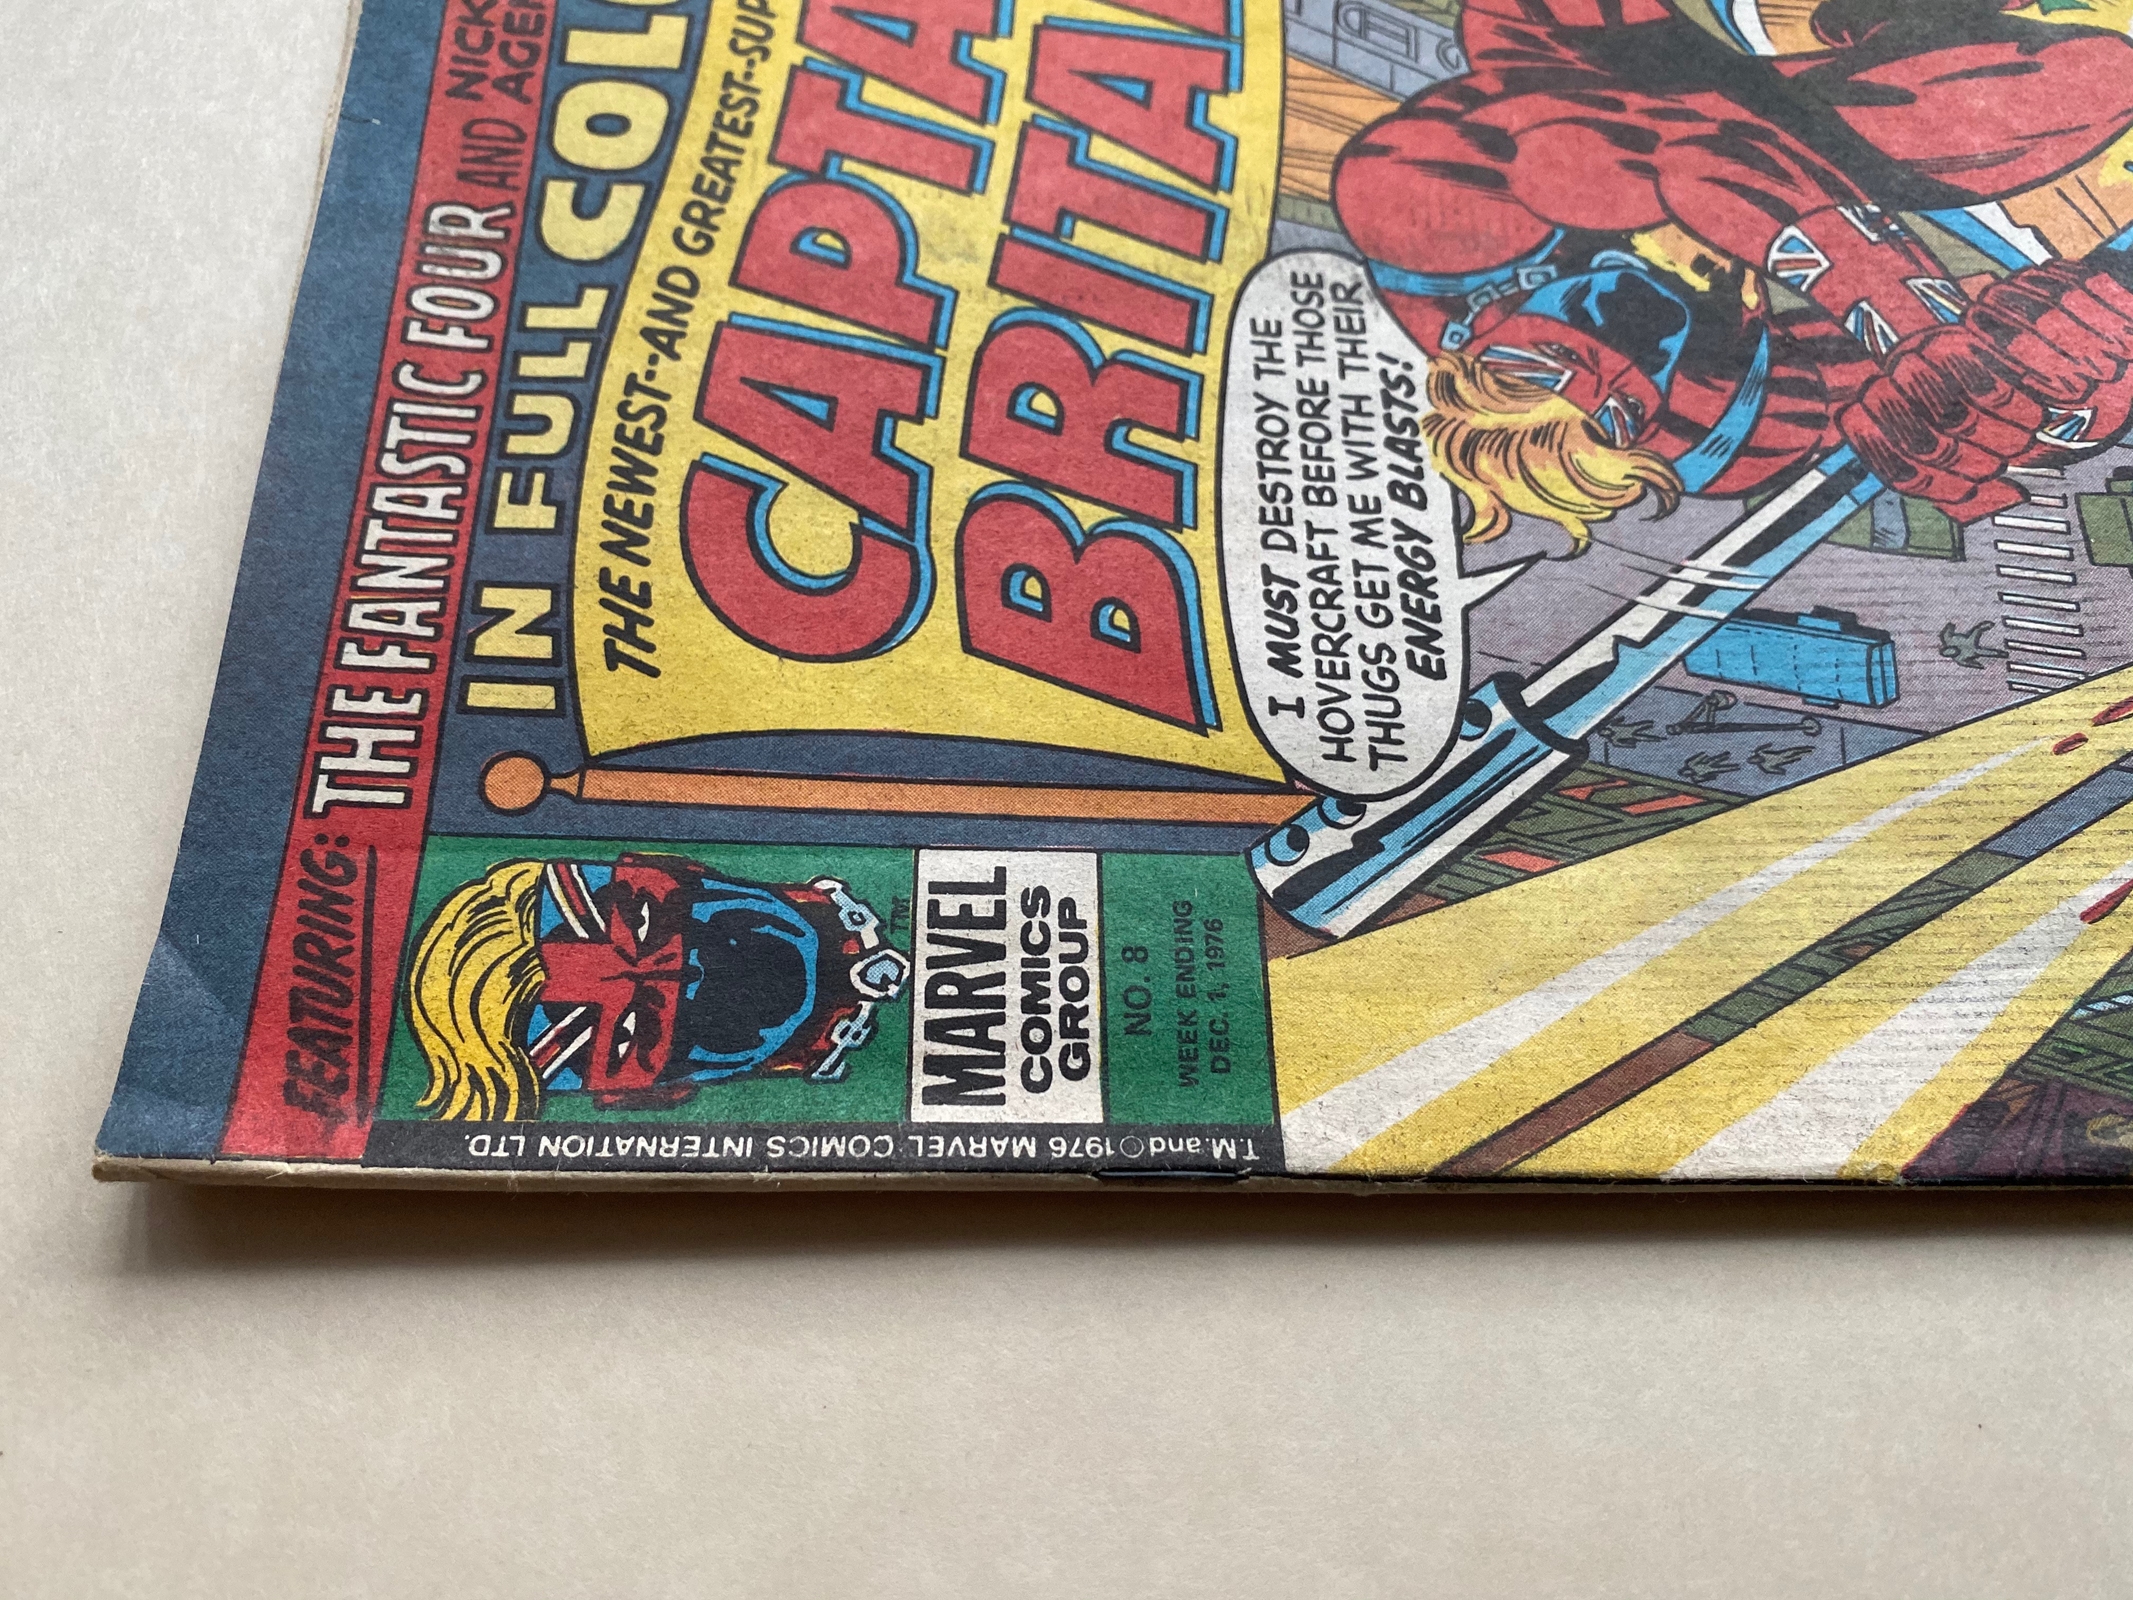 CAPTAIN BRITAIN (6 in Lot) - (1976 - BRITISH MARVEL) - GD/VG (Pence Copy) - Run includes #2, 4, 5, - Image 5 of 8